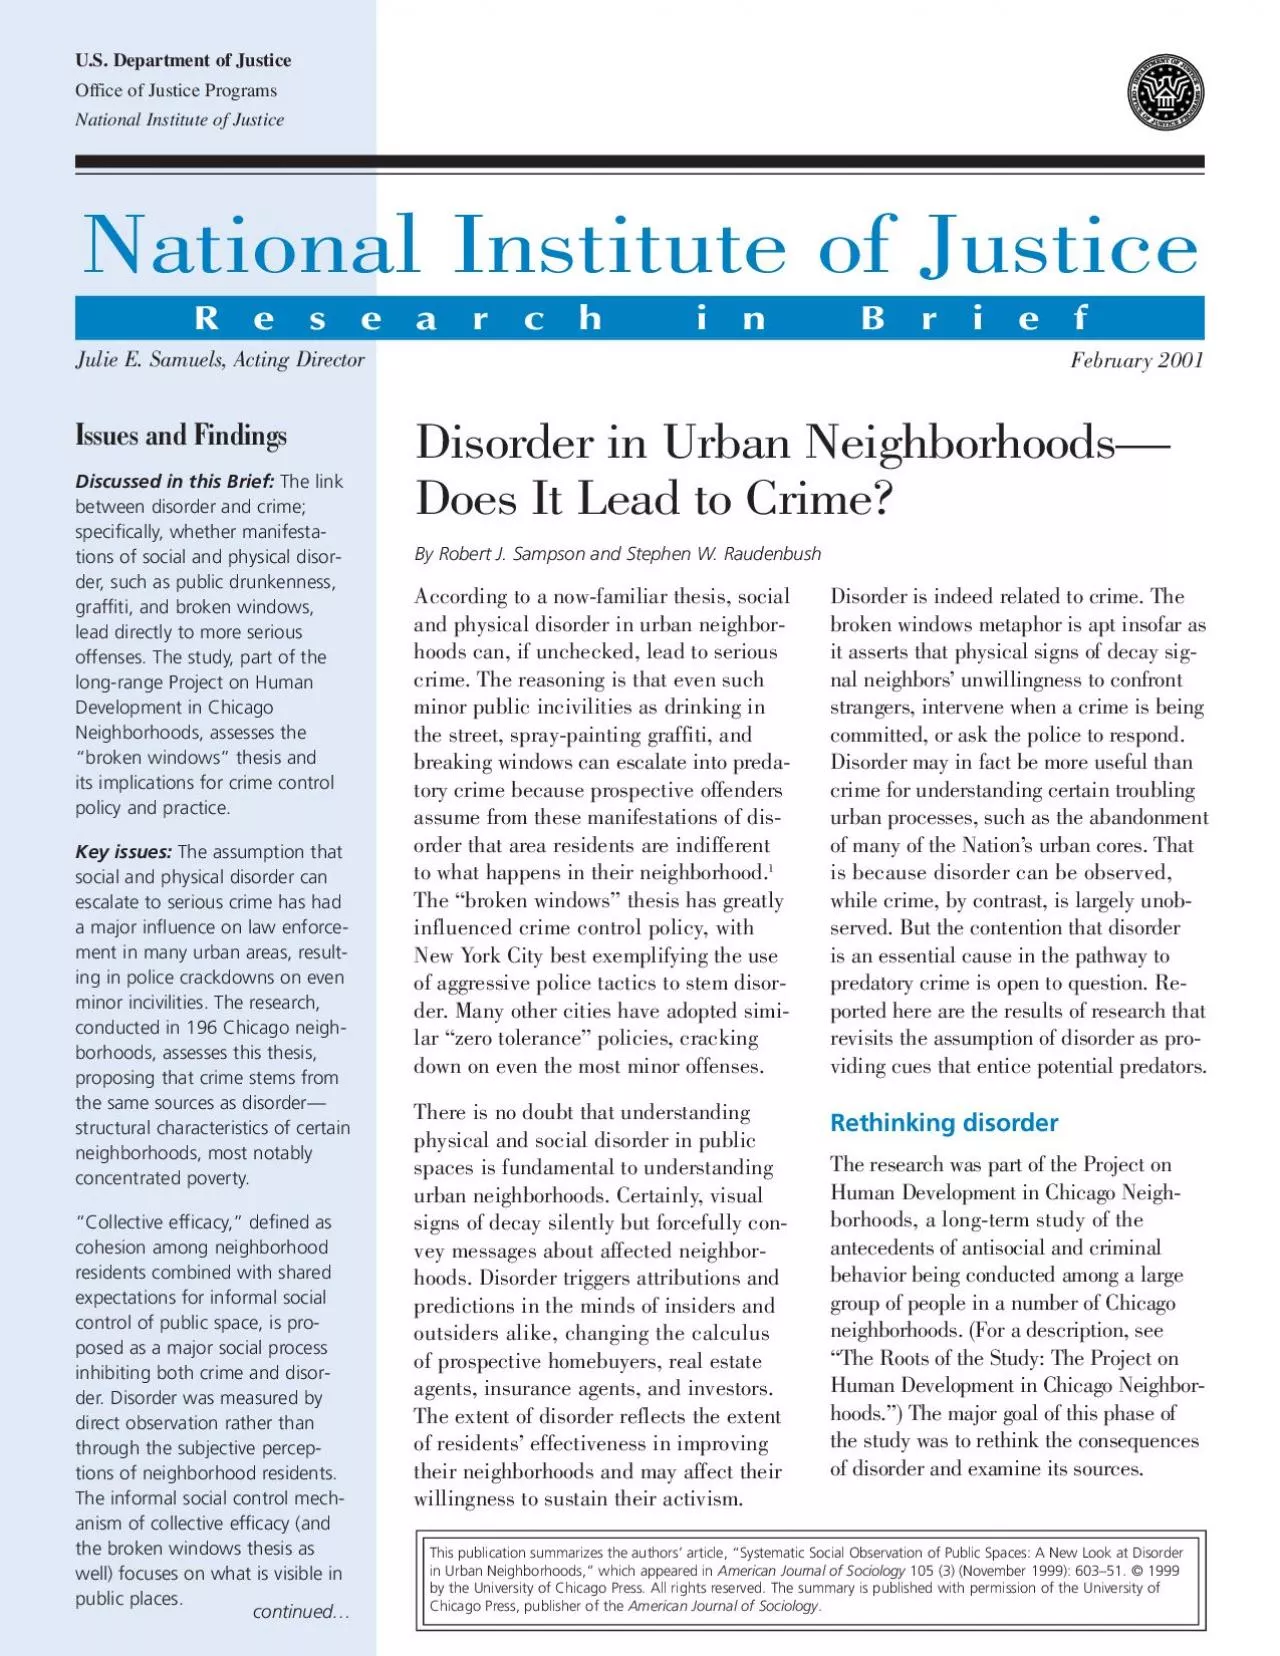 US Department of JusticeOffice of Justice ProgramsNational Institute